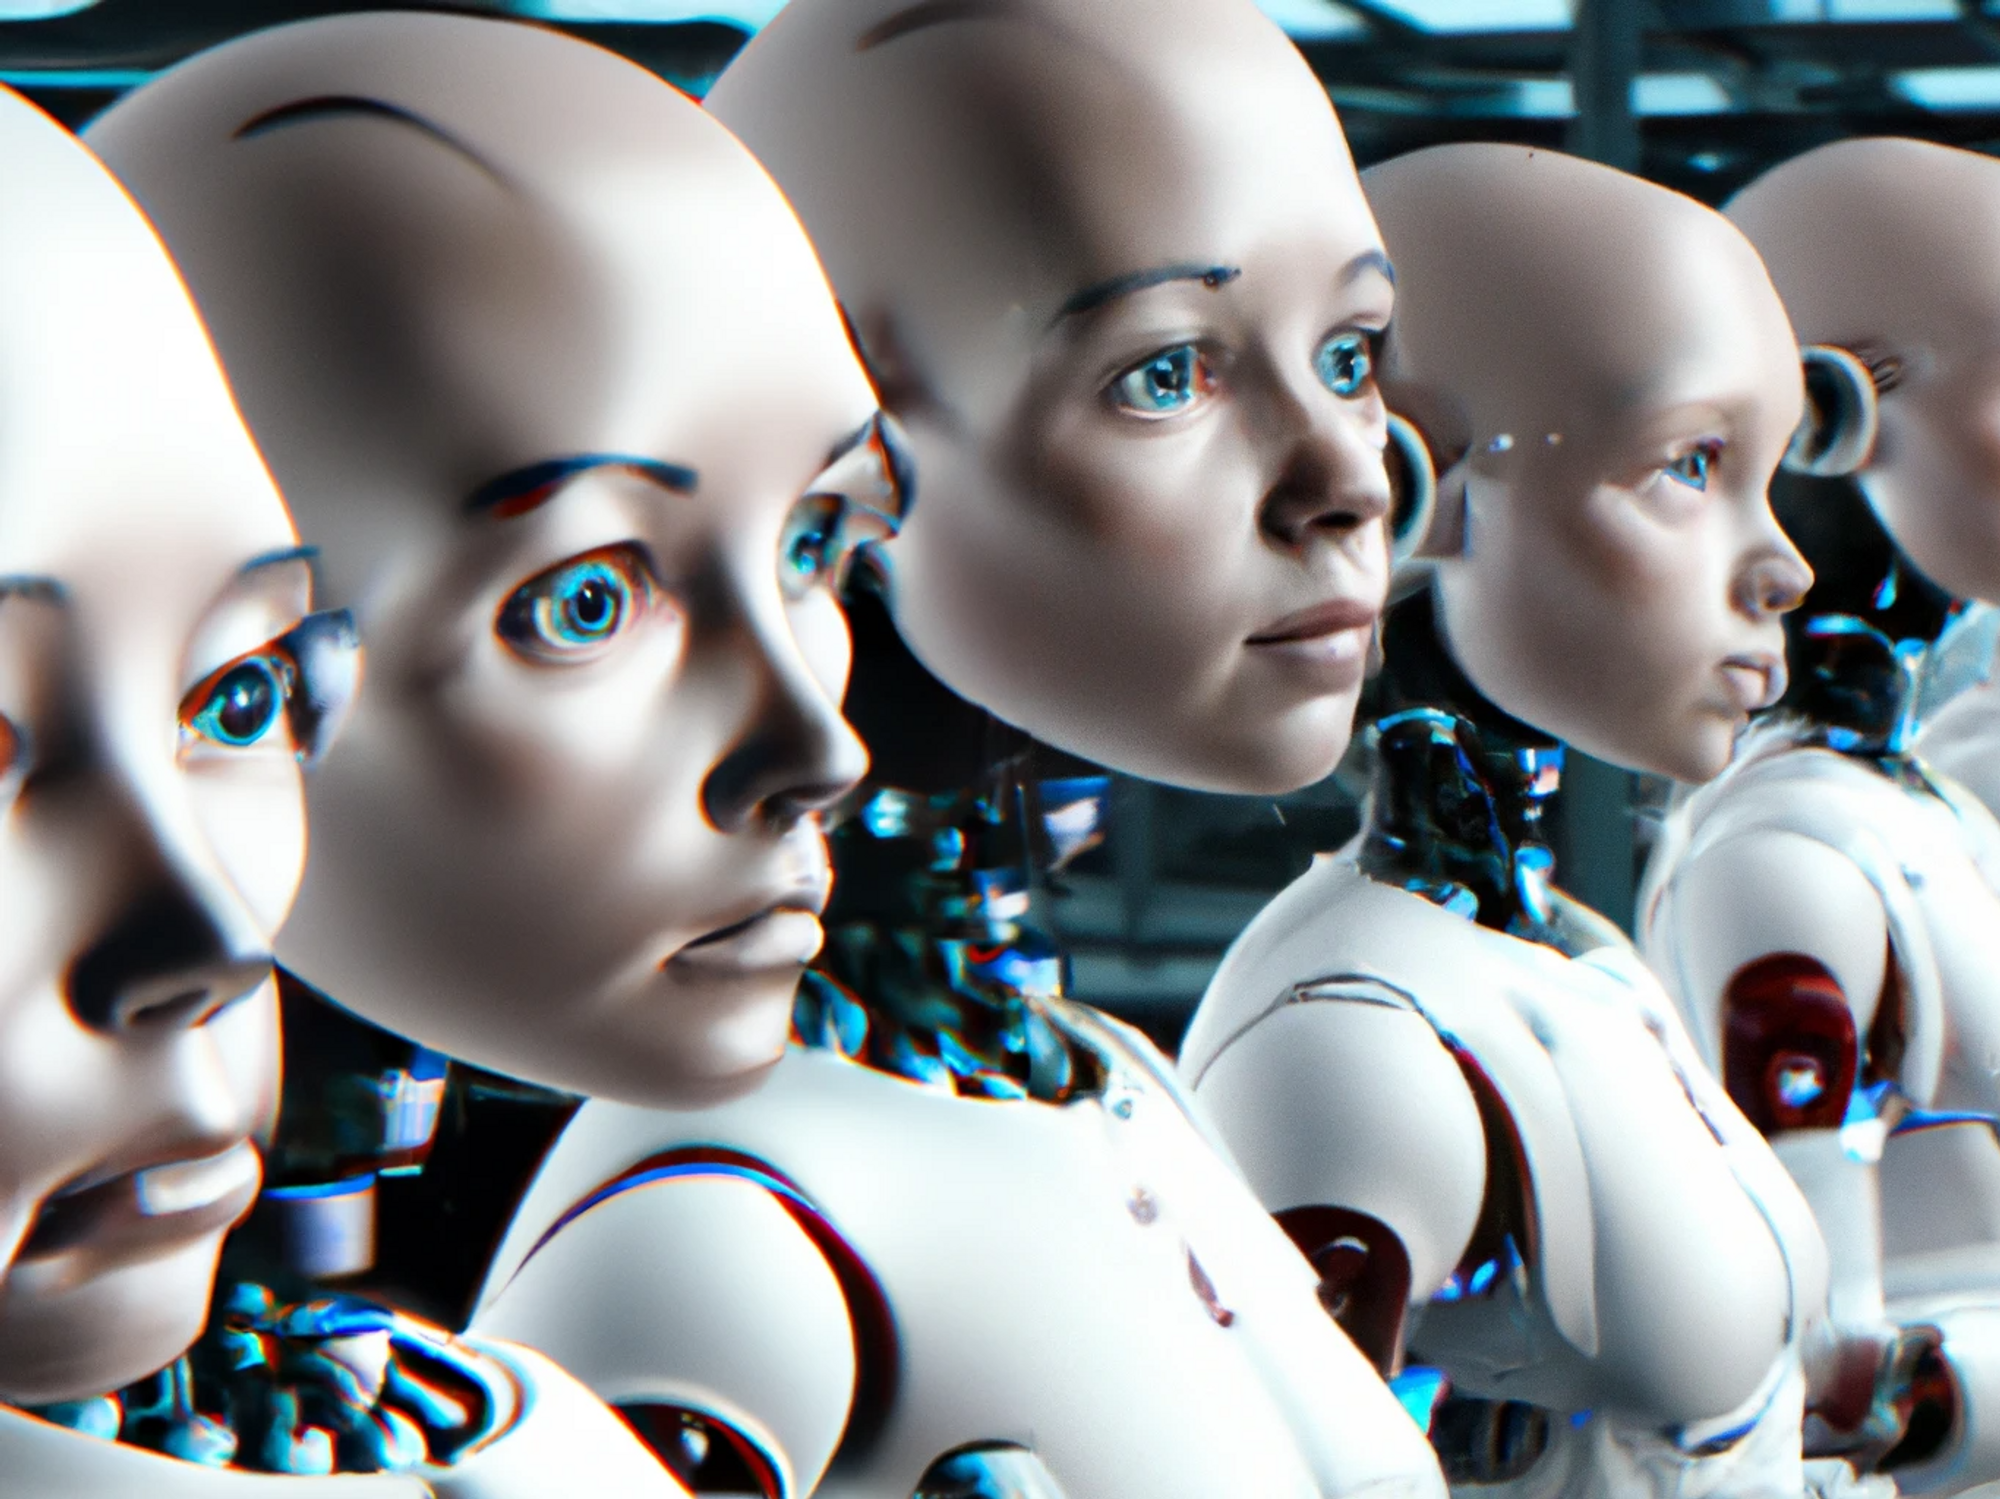 Humanoid robots are coming